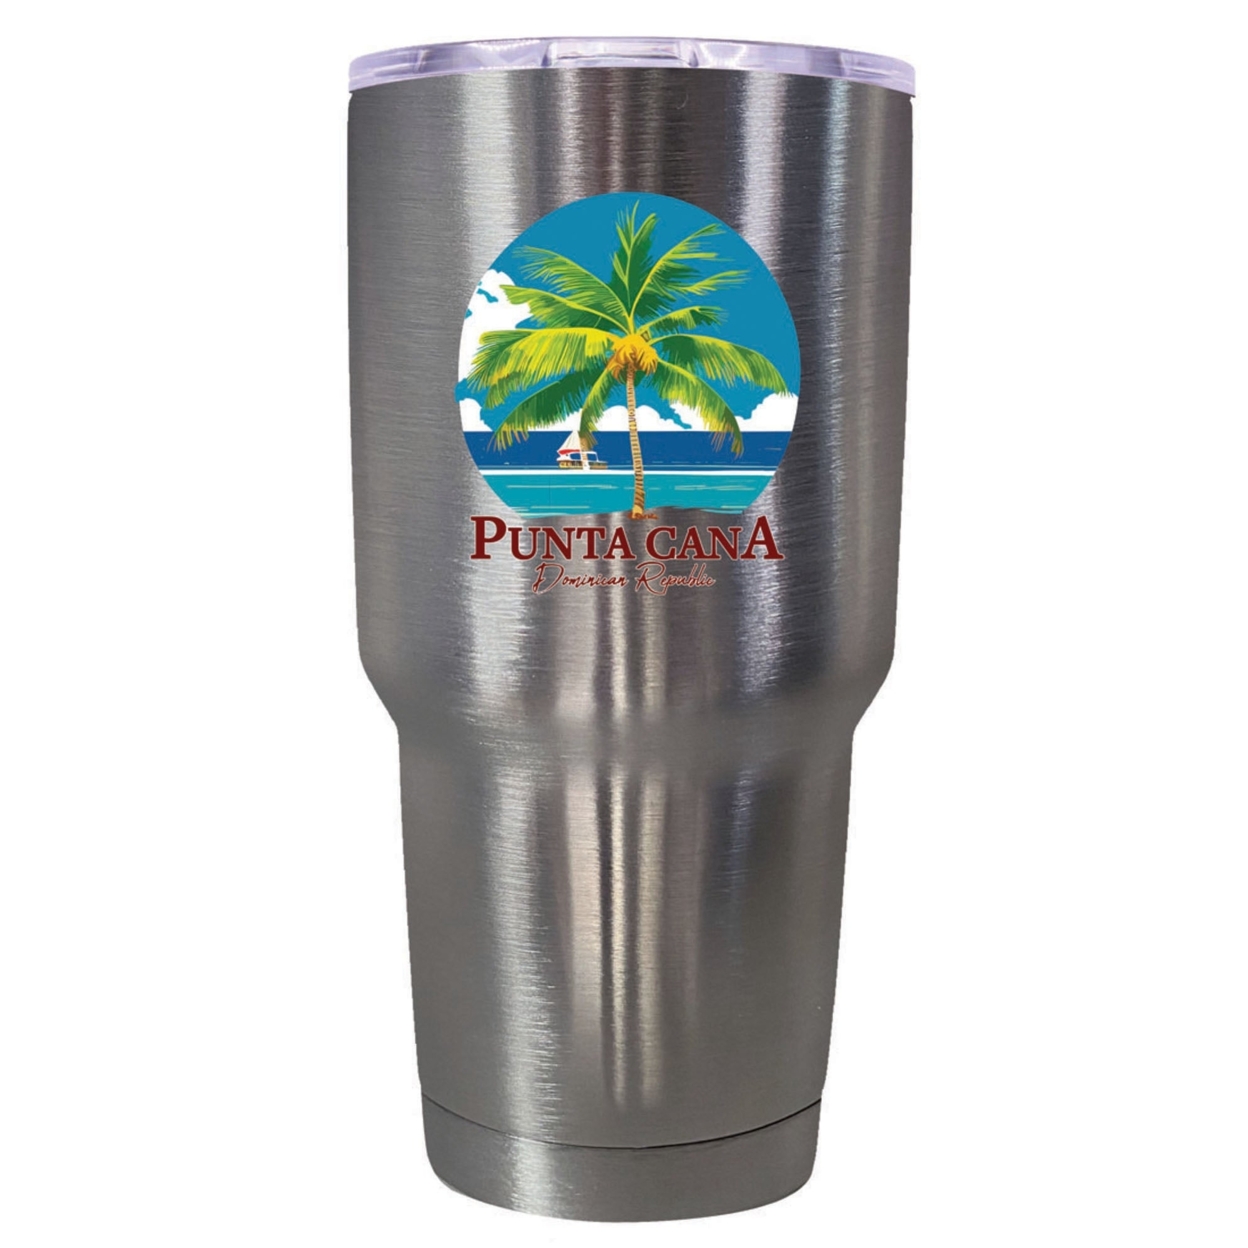 Punta Cana Dominican Republic Souvenir 24 Oz Insulated Stainless Steel Tumbler - Coral, PARROT B